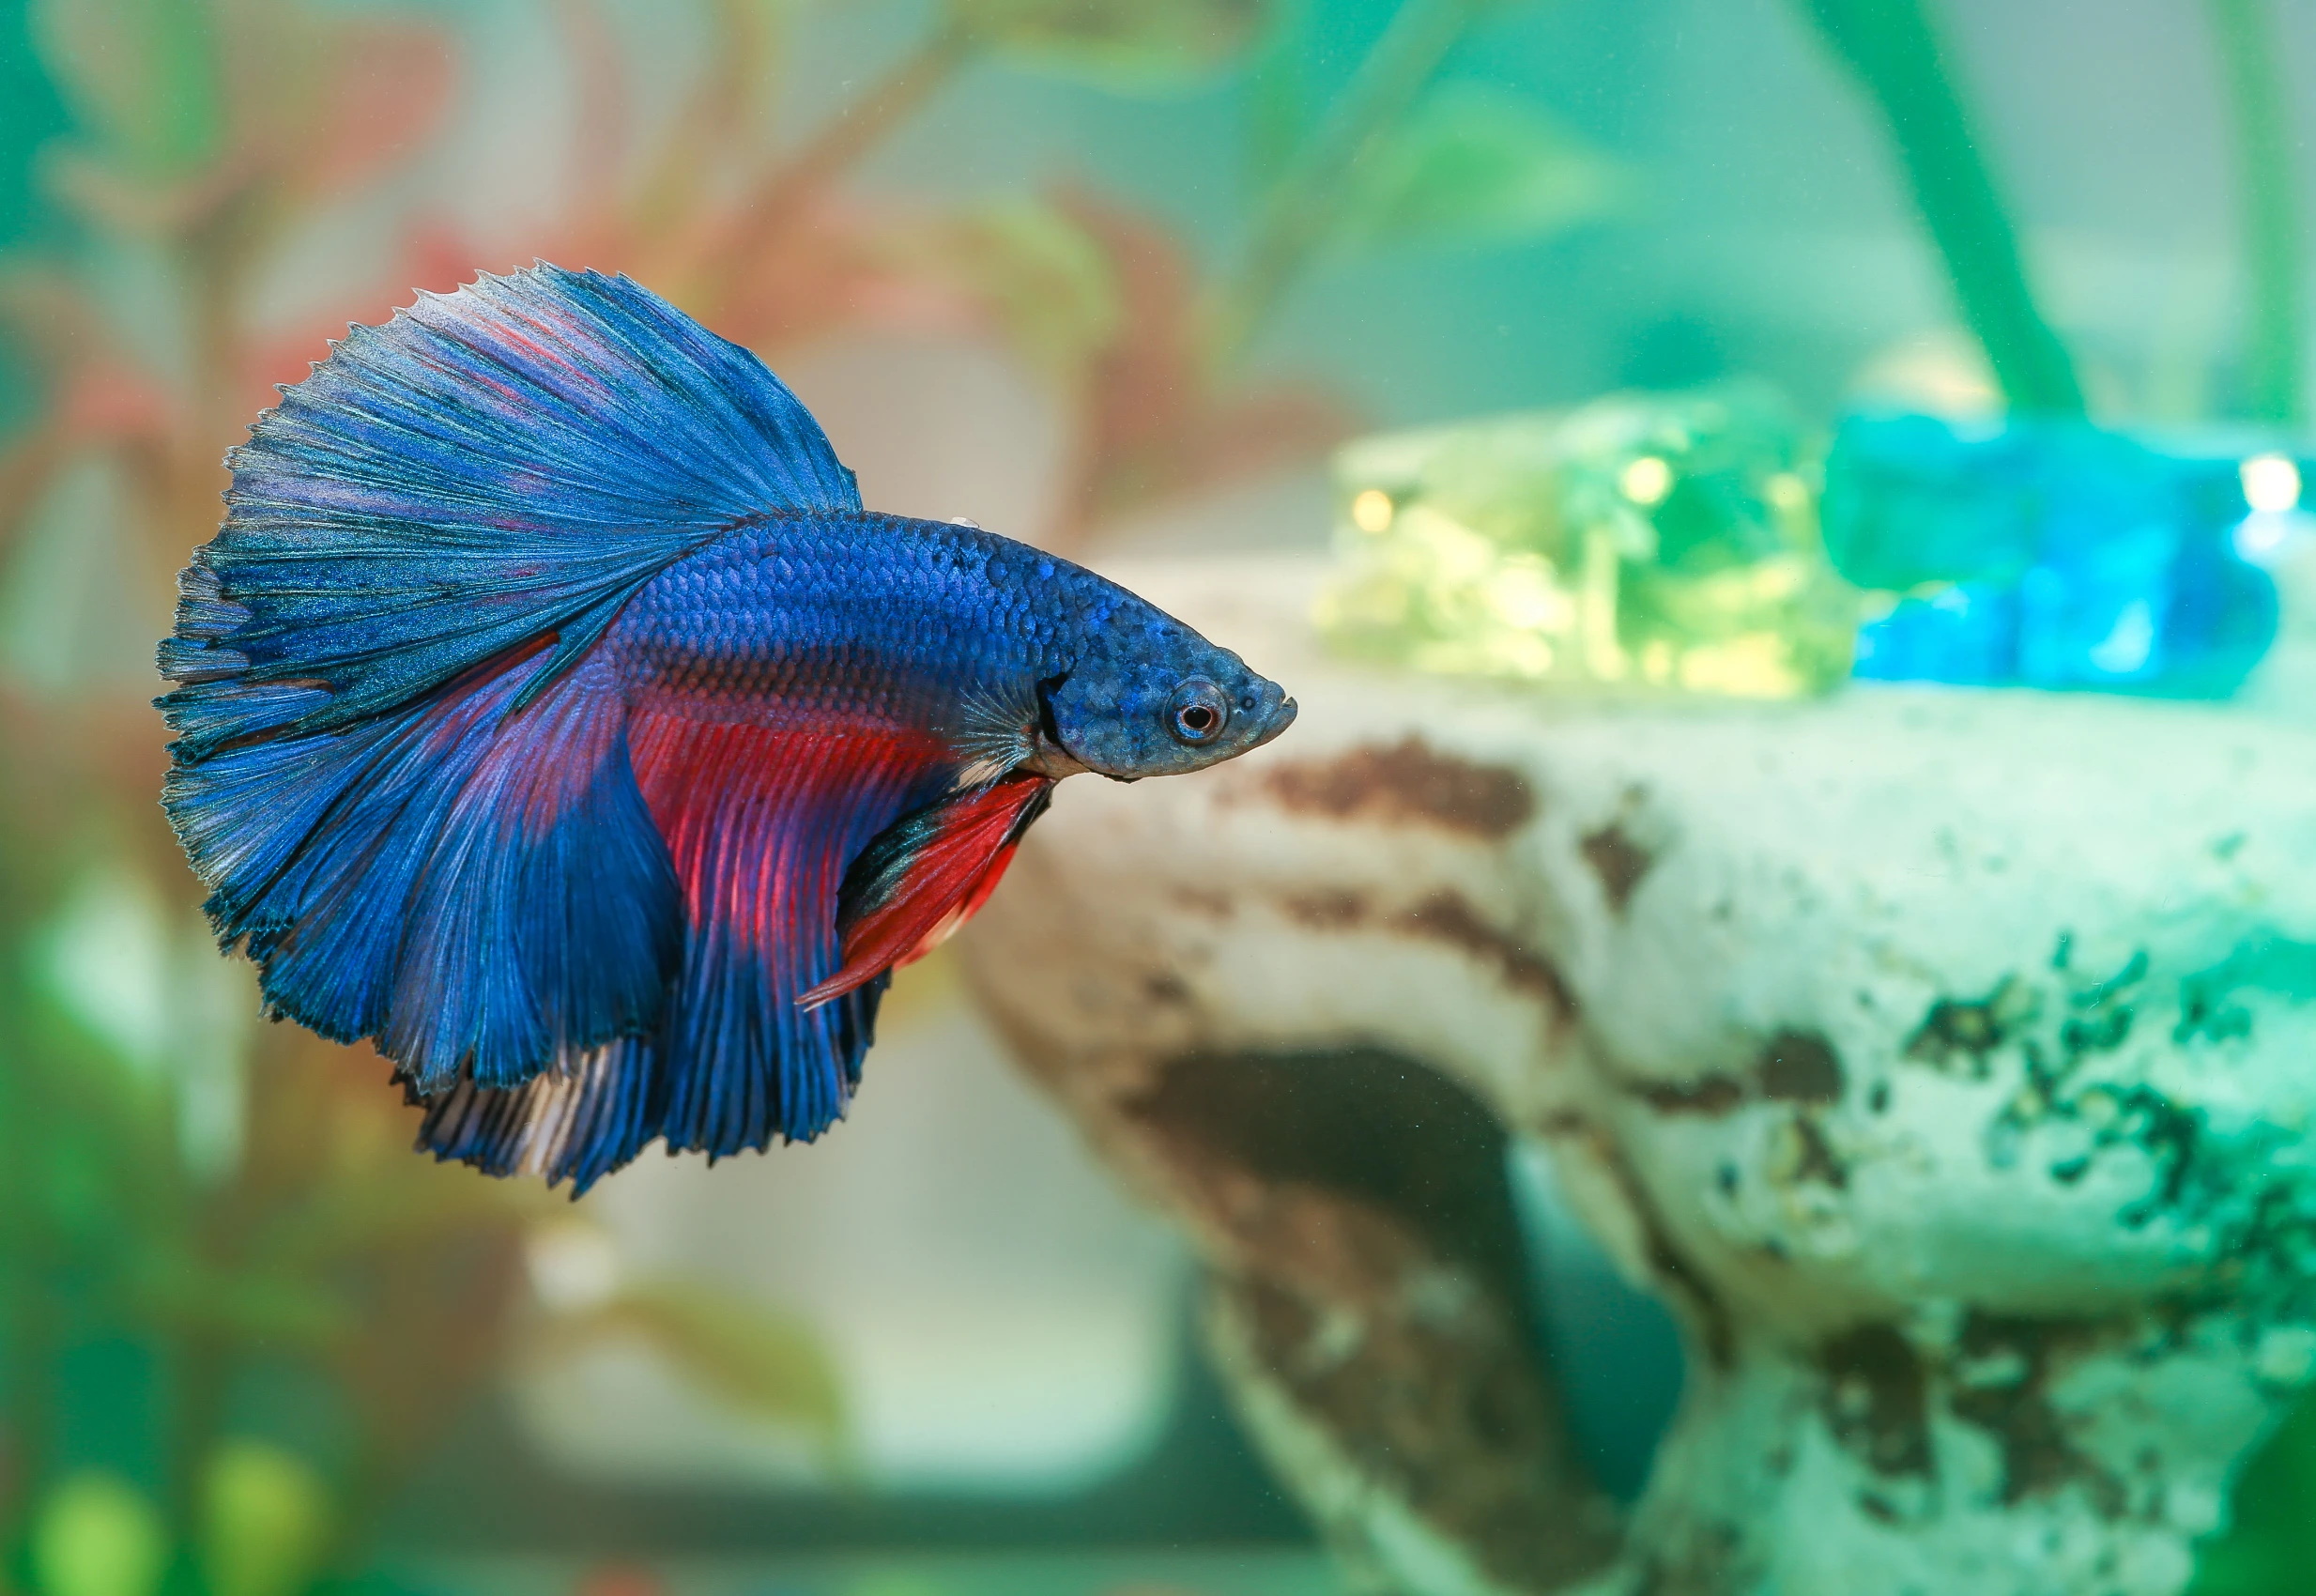 <p>Fish are excellent pets for small spaces. An aquarium not only houses these quiet creatures but also adds a decorative element to your living space. Species like tetras, guppies, and bettas are particularly well-suited for smaller tanks and are relatively easy to care for, making them perfect for beginners.</p>